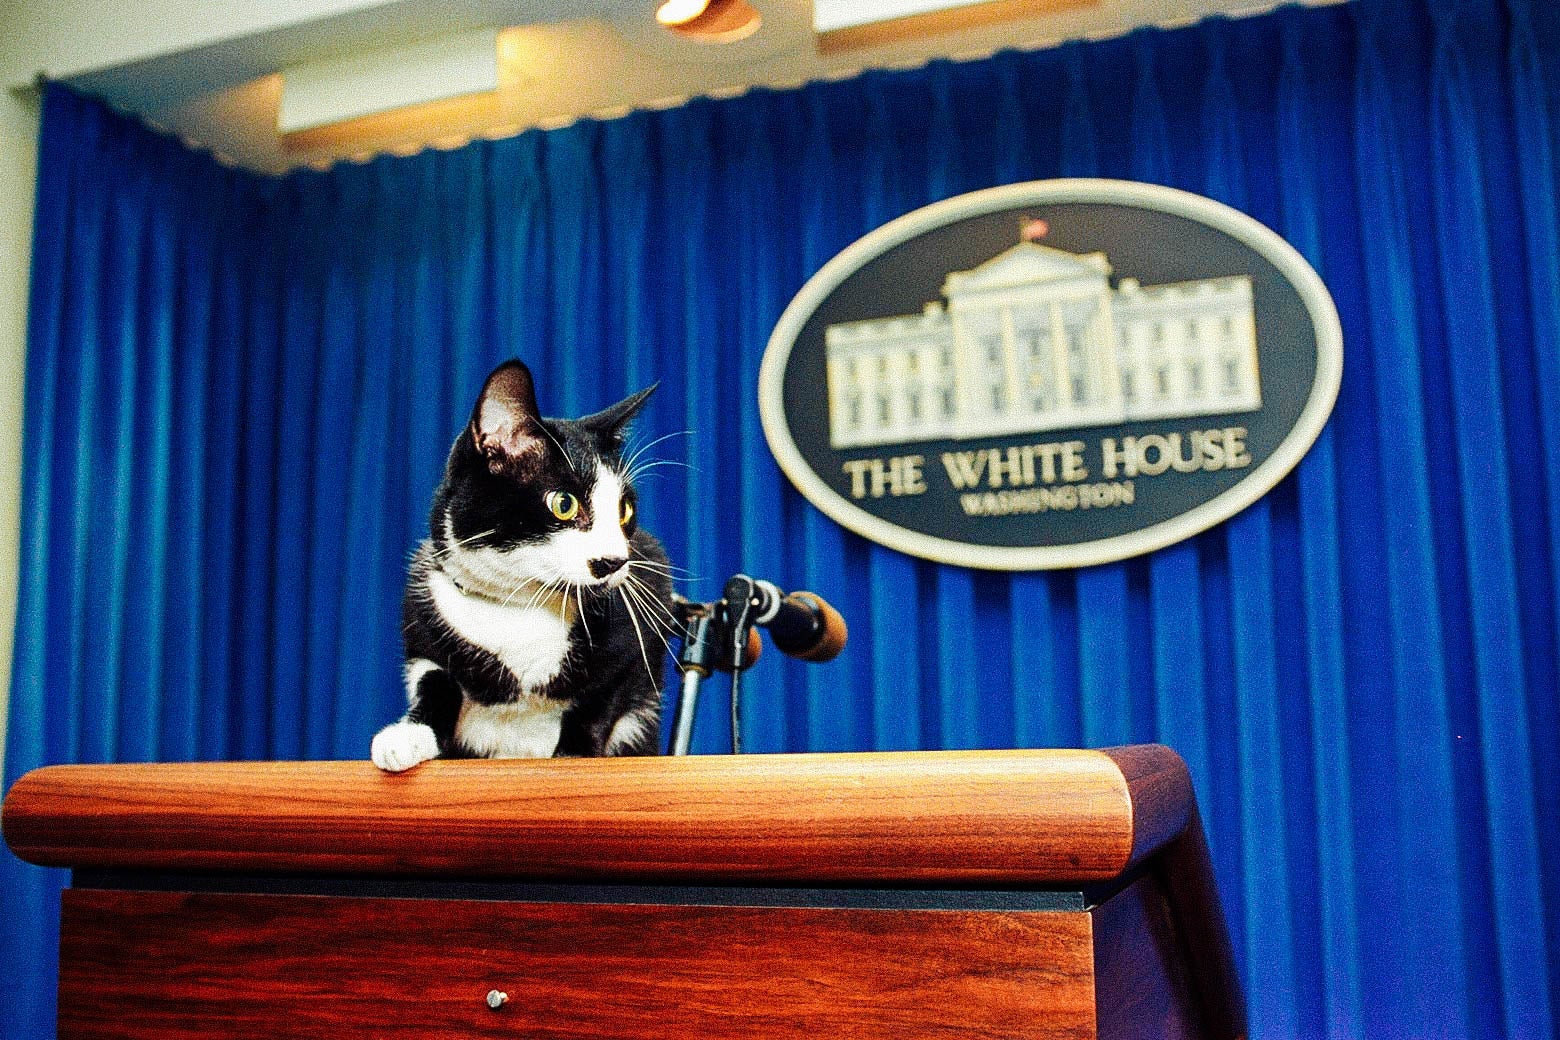 Socks, a black-and-white cat, sits atop the podium in the White House press briefing room.